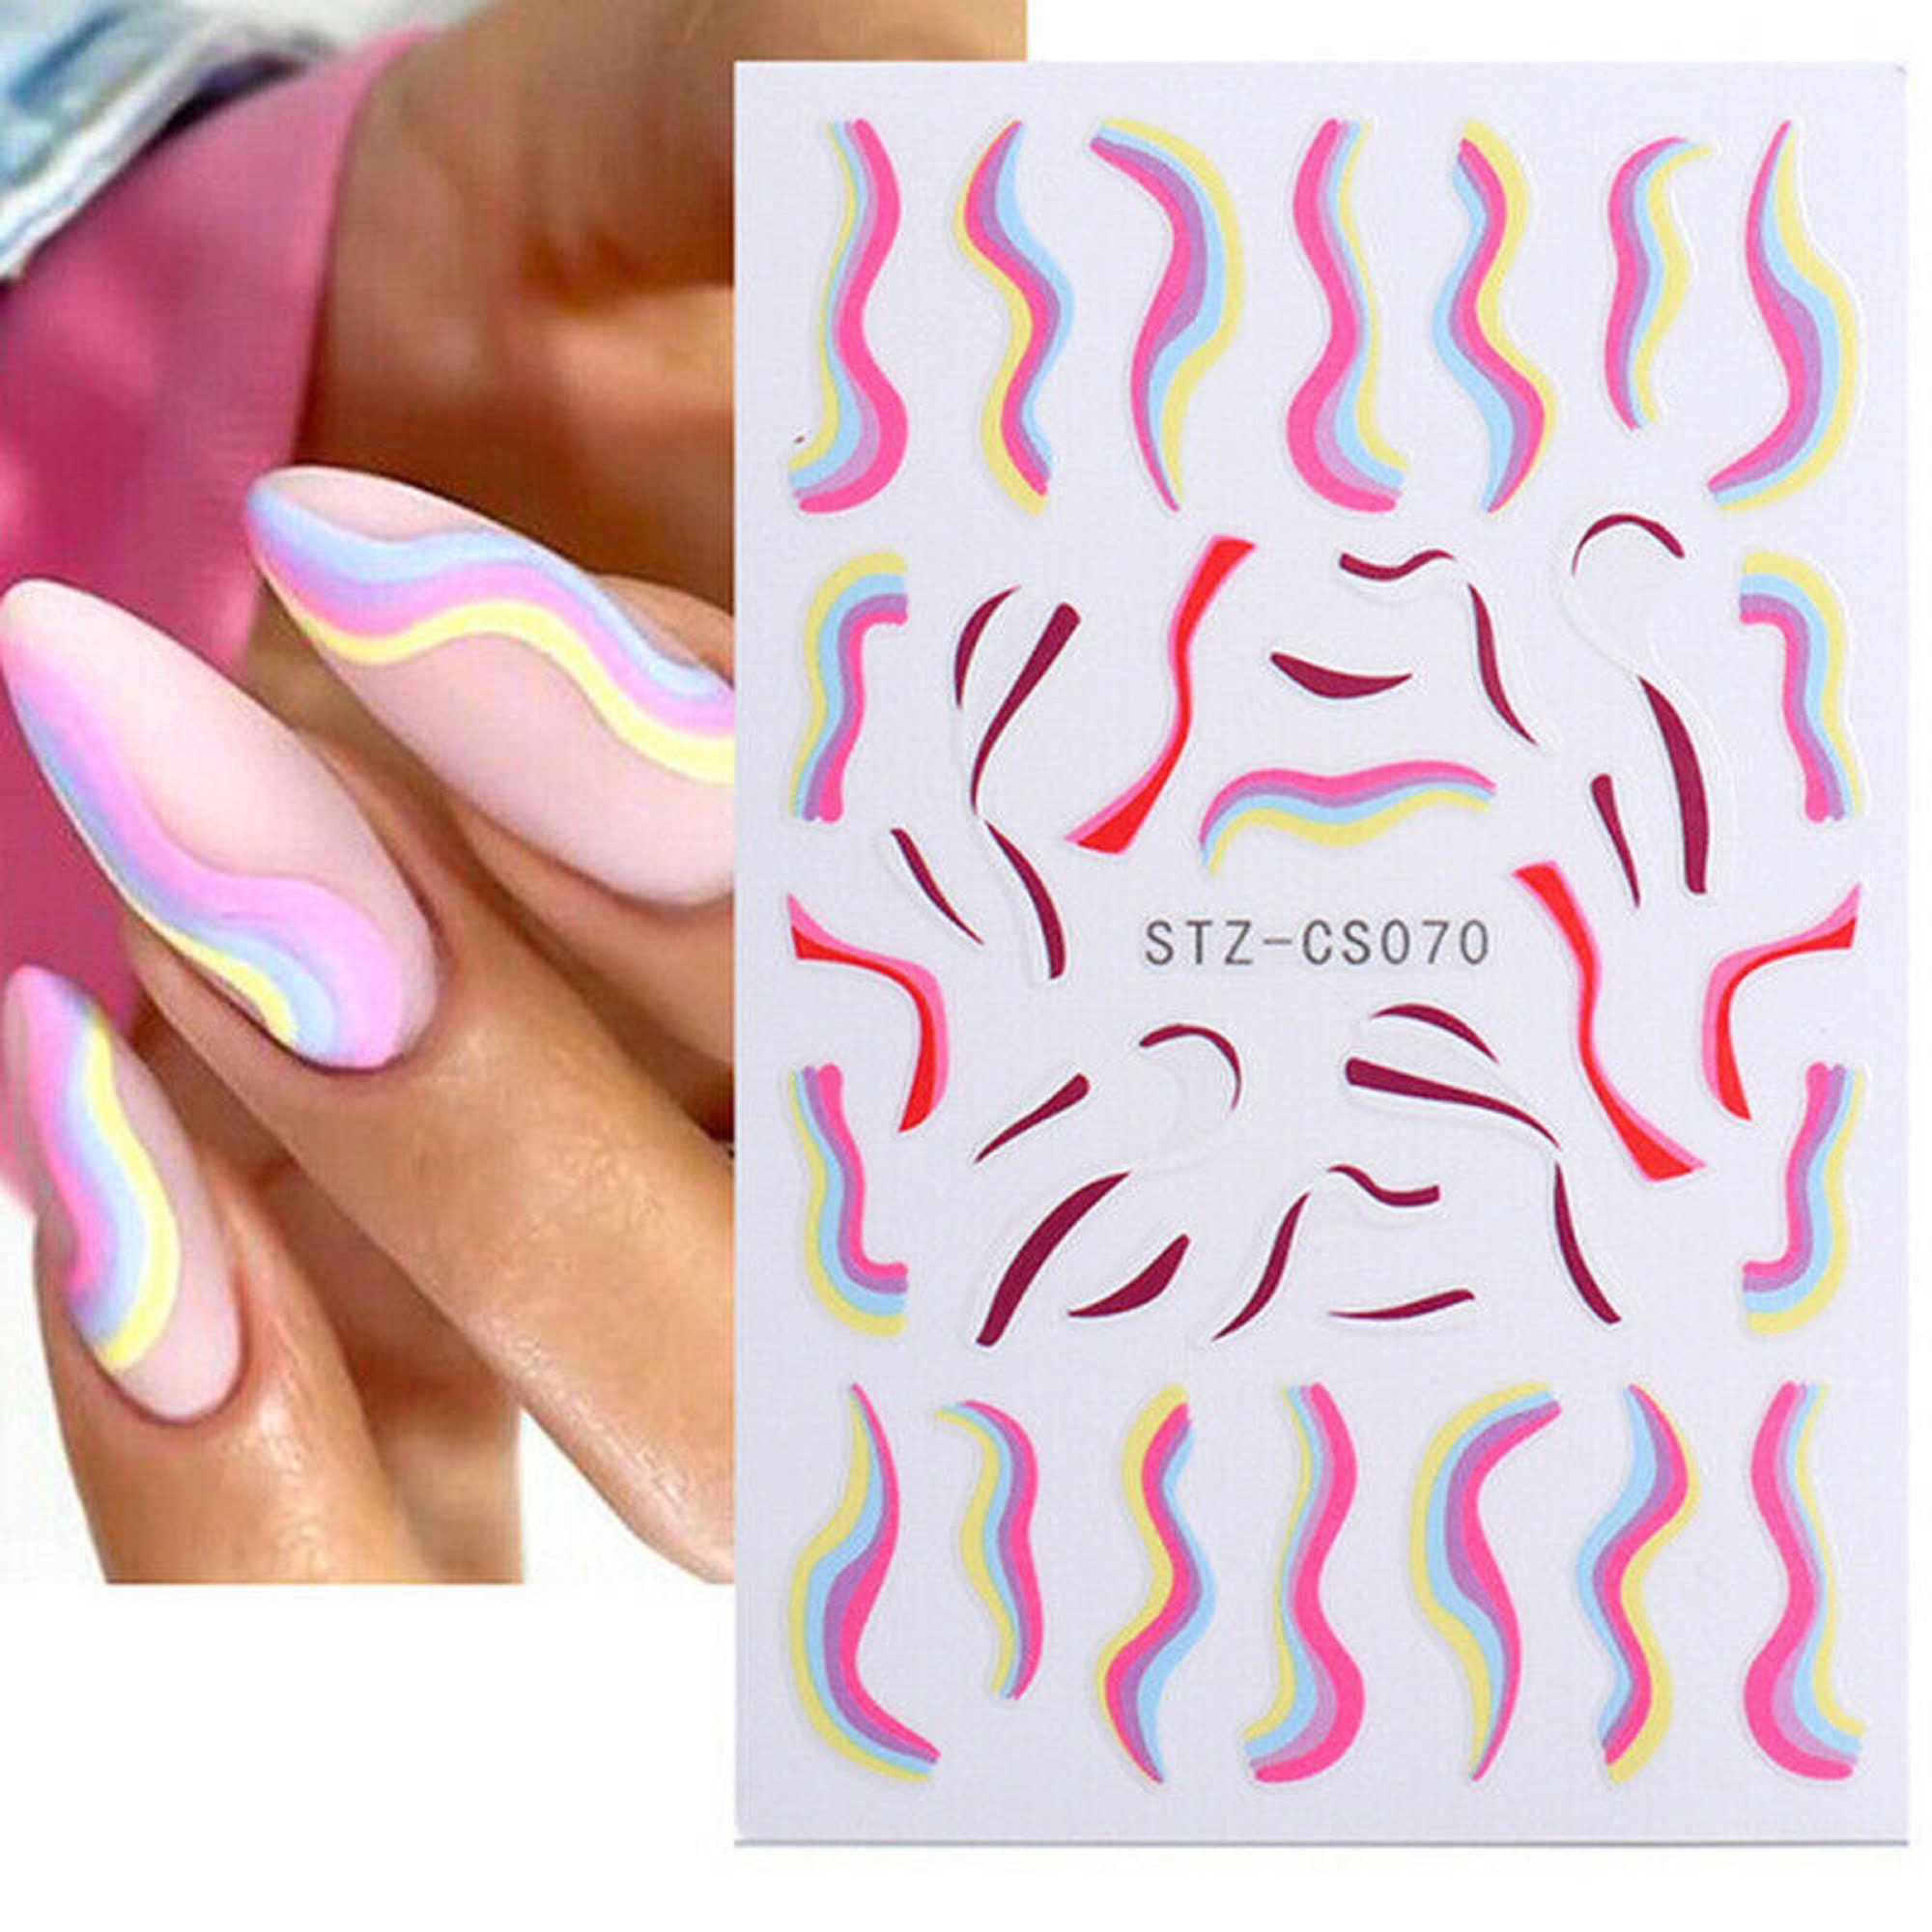 Nail Art Stickers Transfers Decals Neon Hot Pink White Purple - Etsy